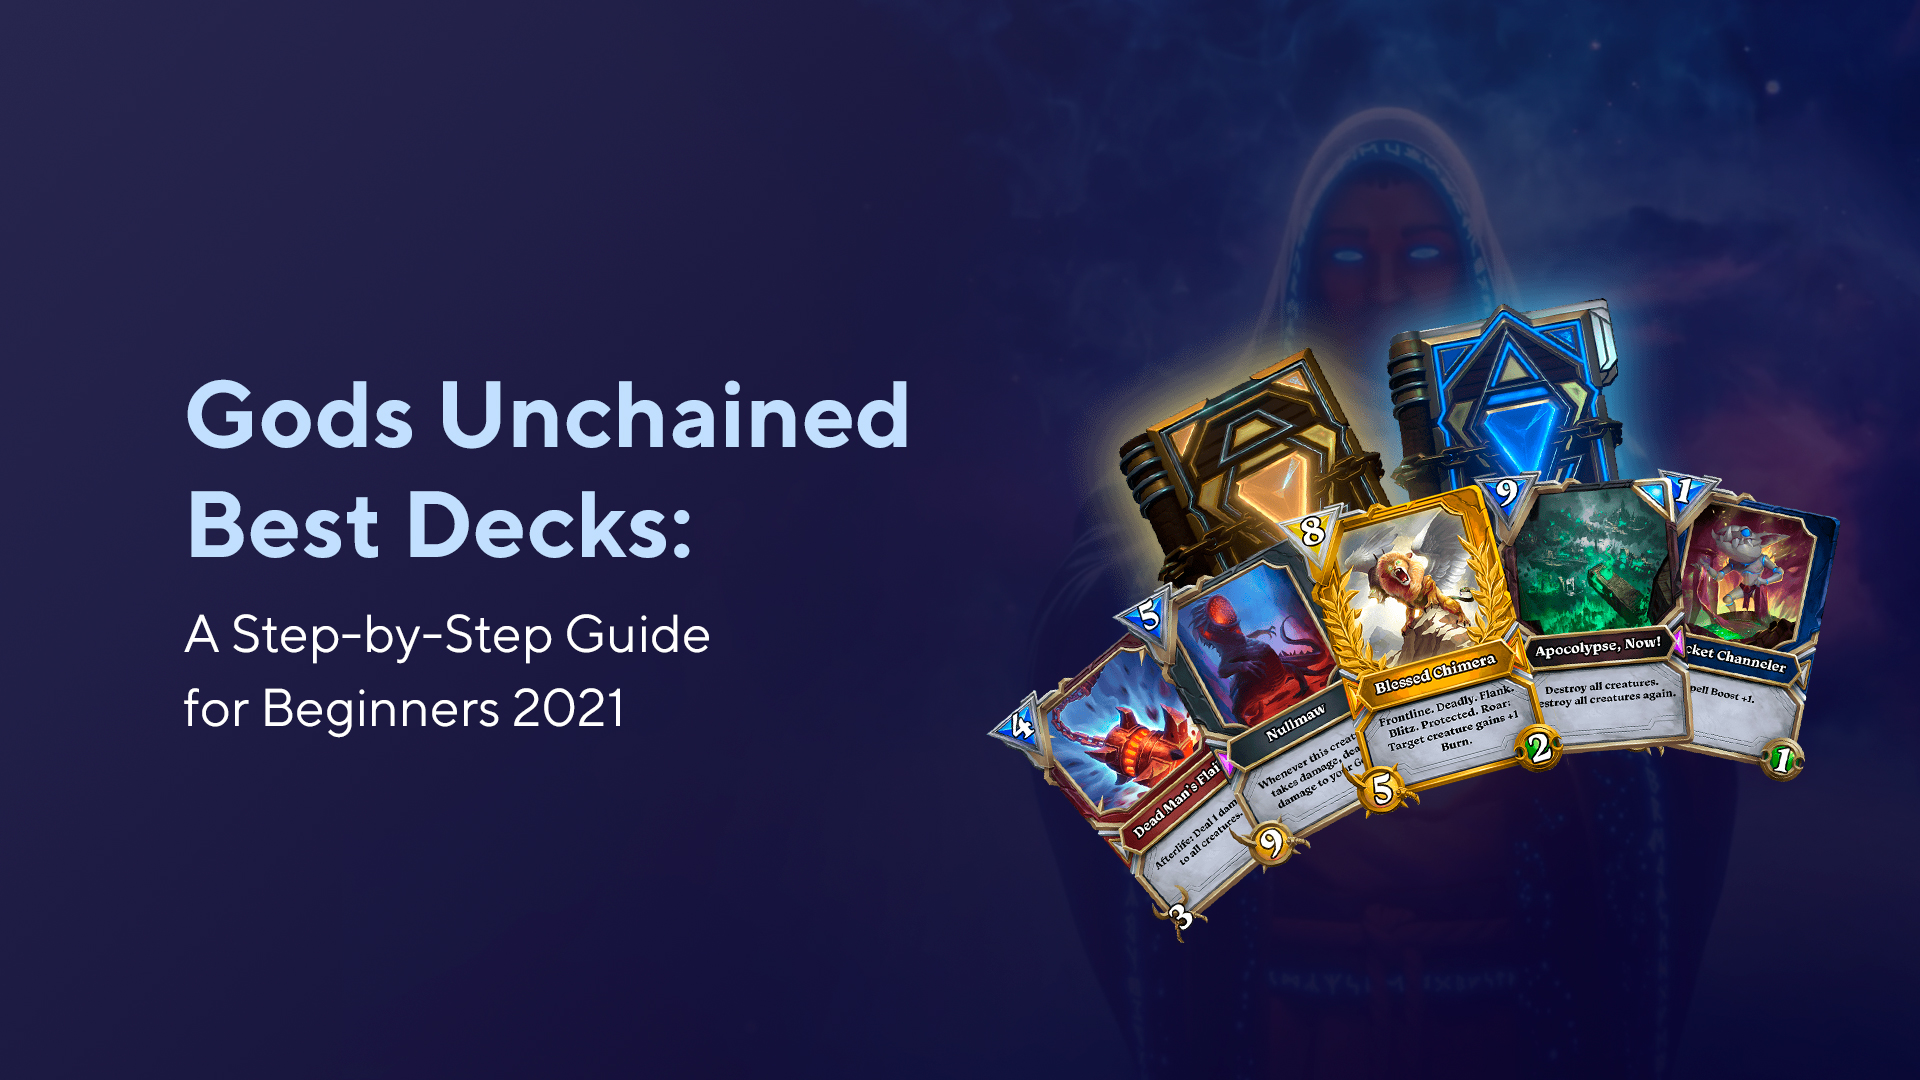 Gods Unchained Best Decks: A Step-by-Step Cards Guide for Beginners 2022